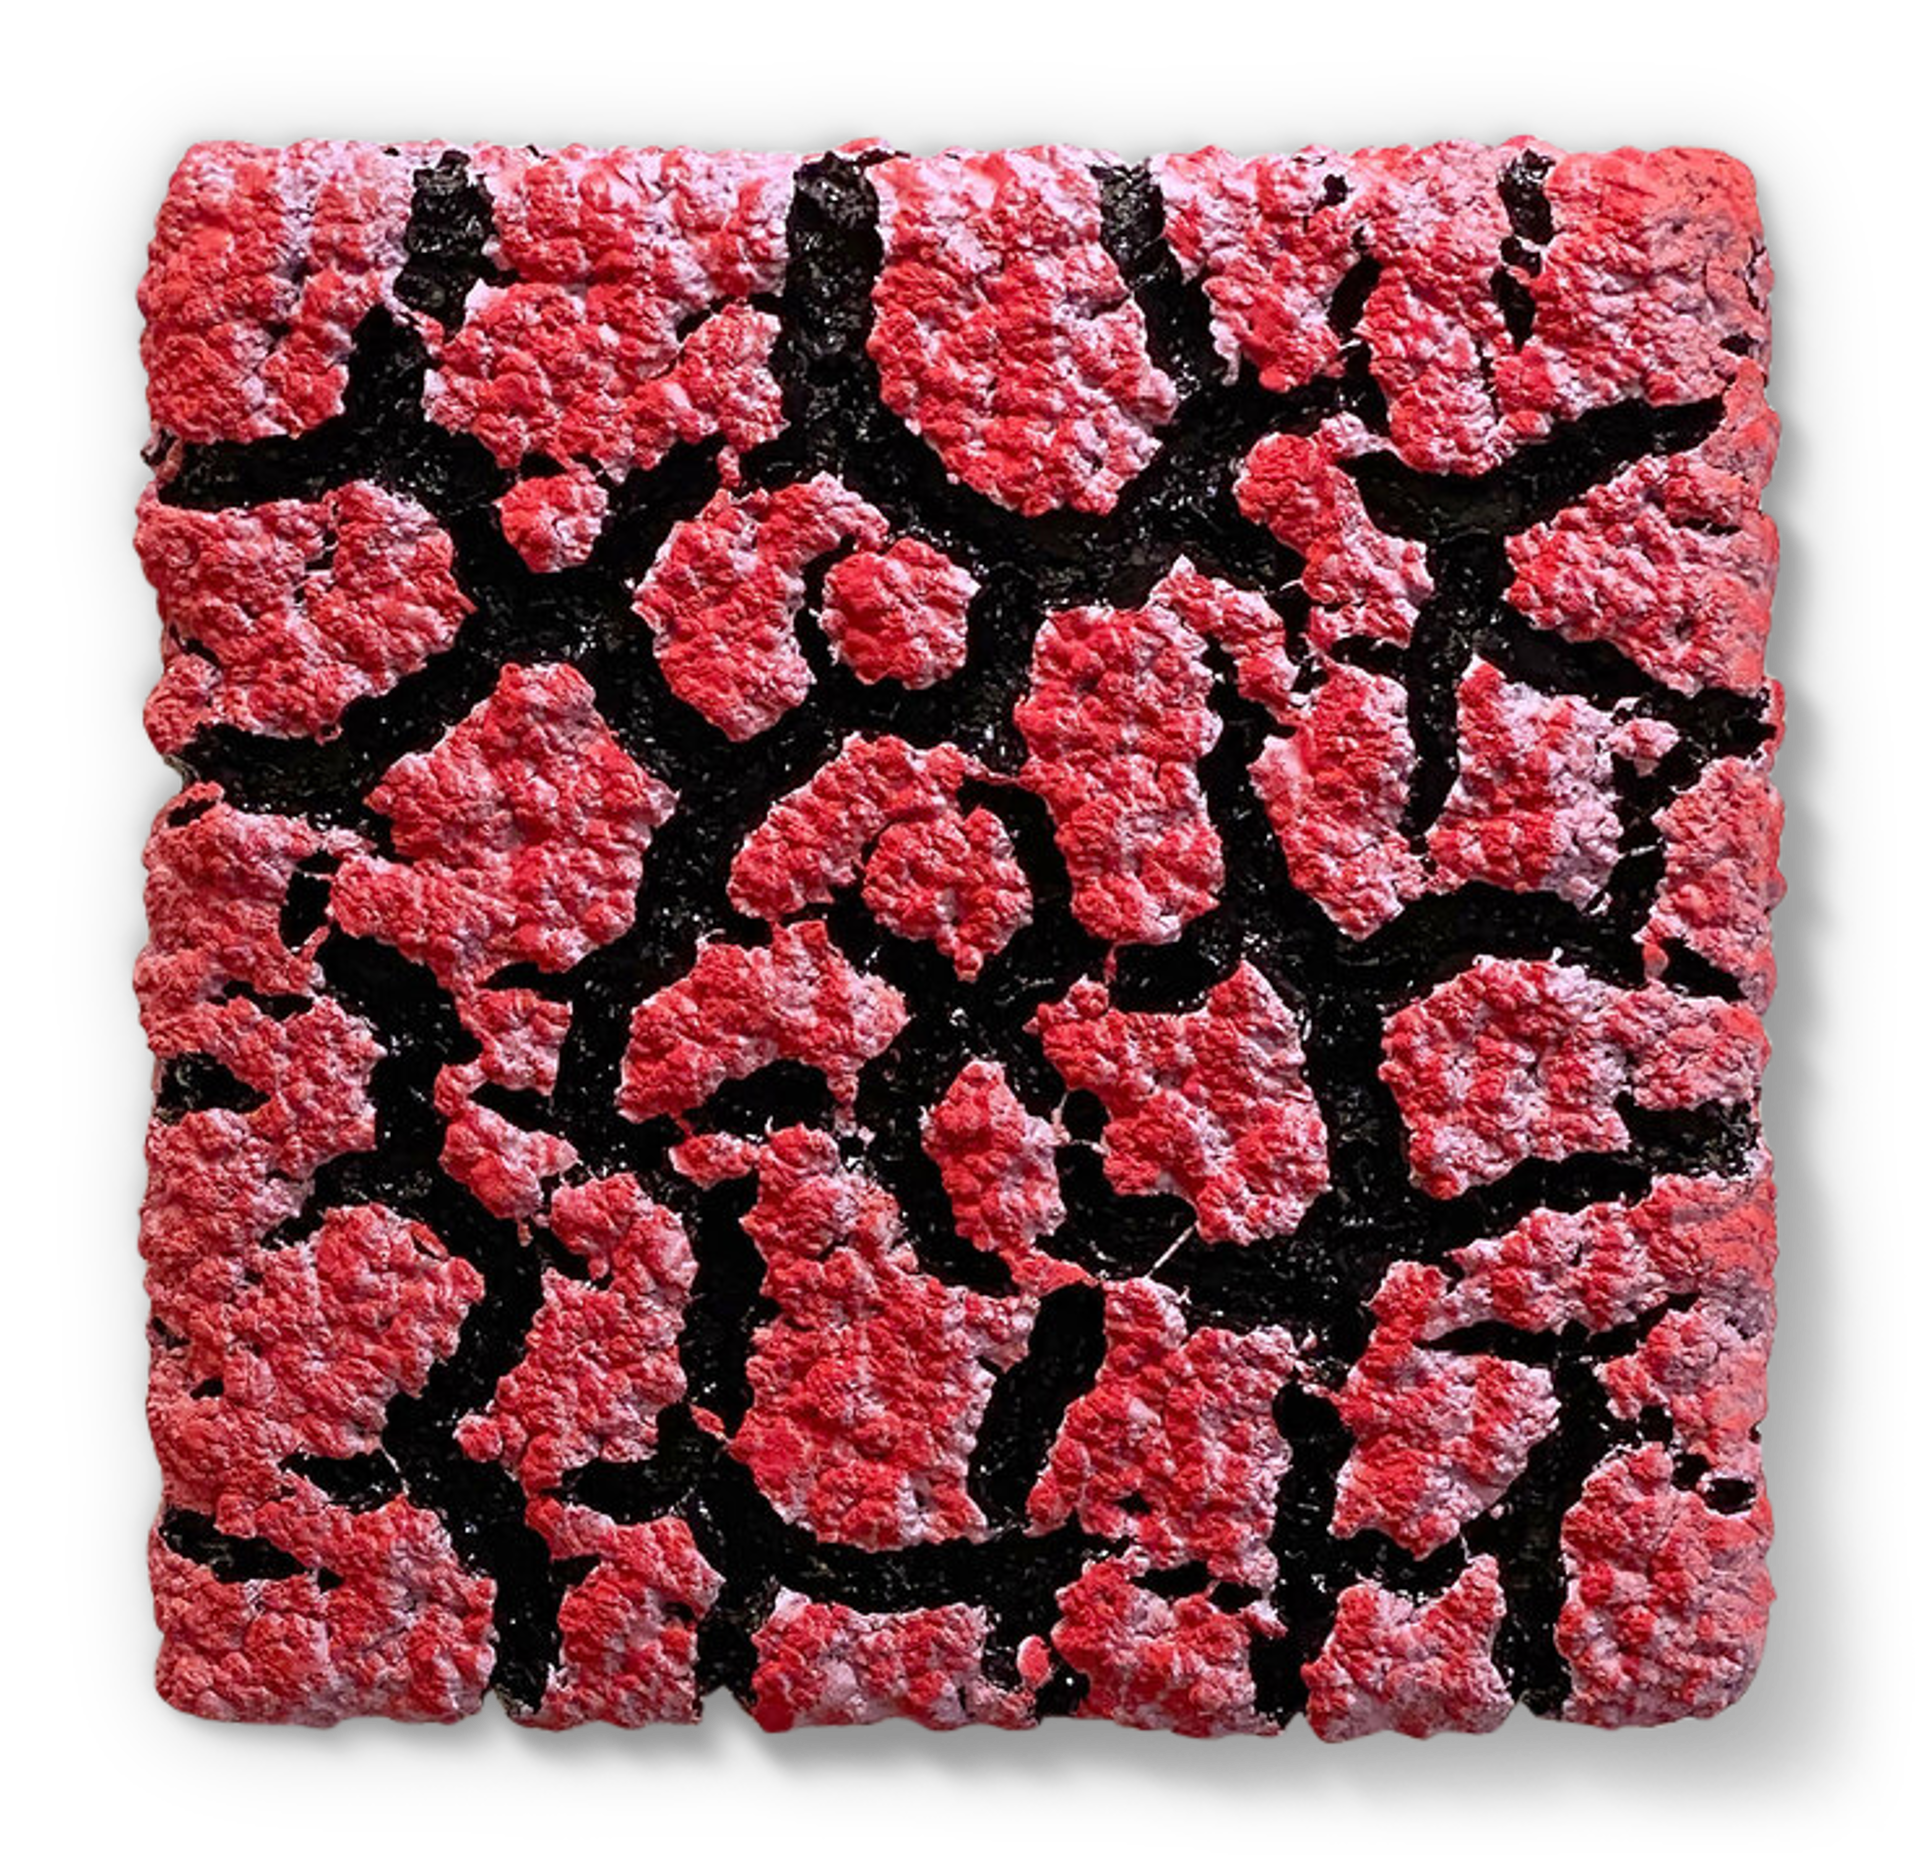 Purple & Red Lichen Wall Piece (Other colors can be ordered) by Randy O'Brien